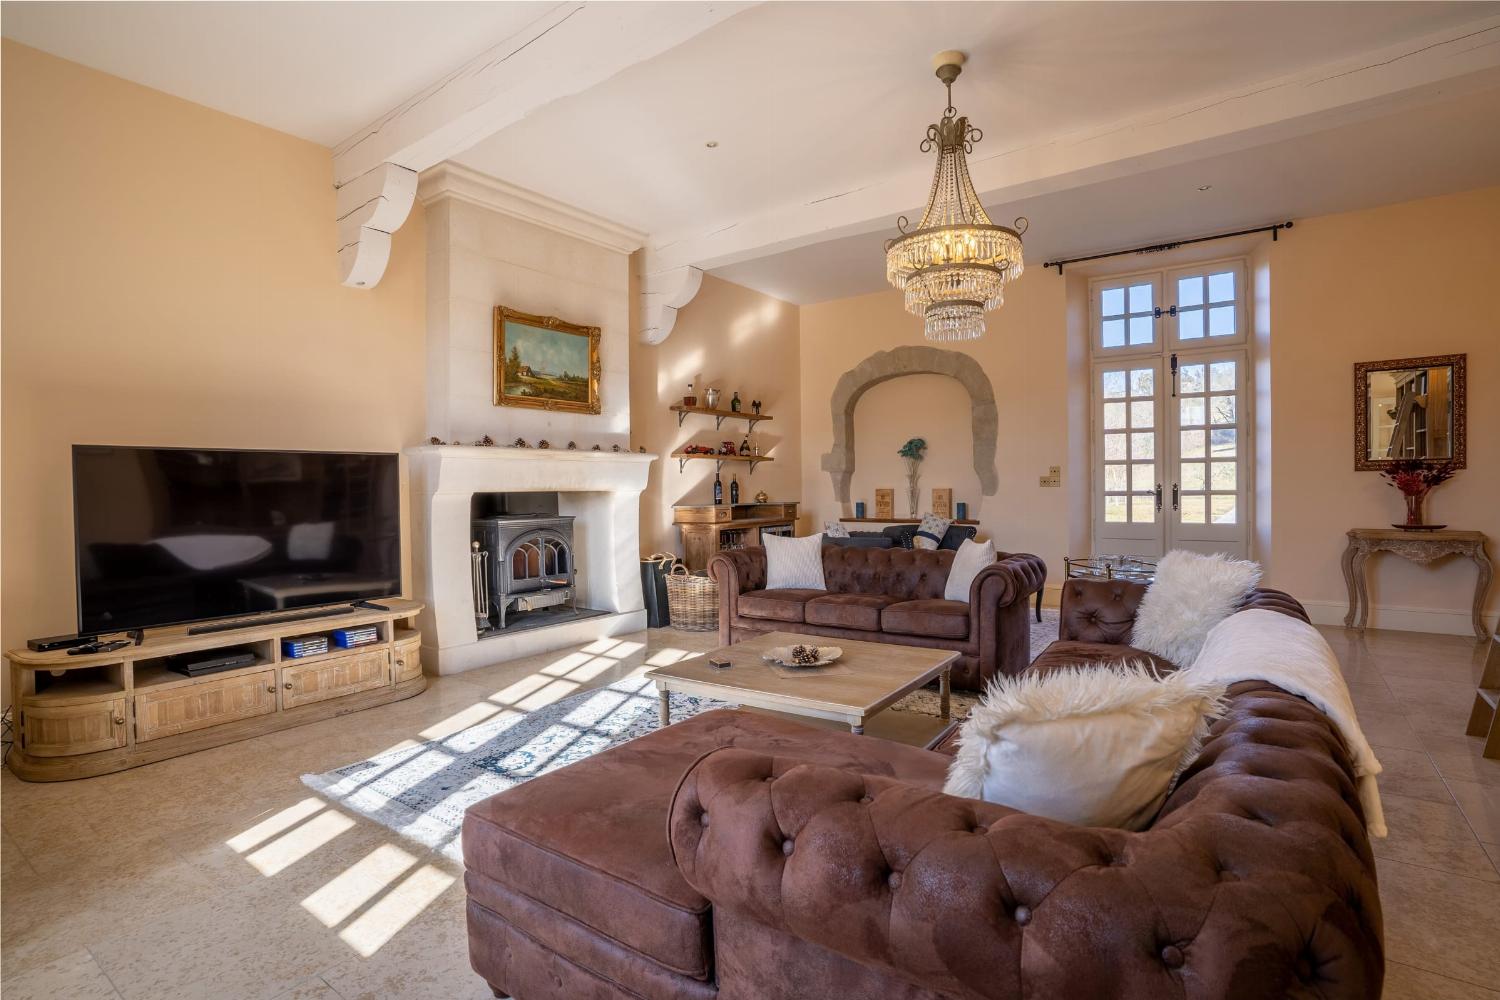 Sitting room | Holiday home in the Tarn